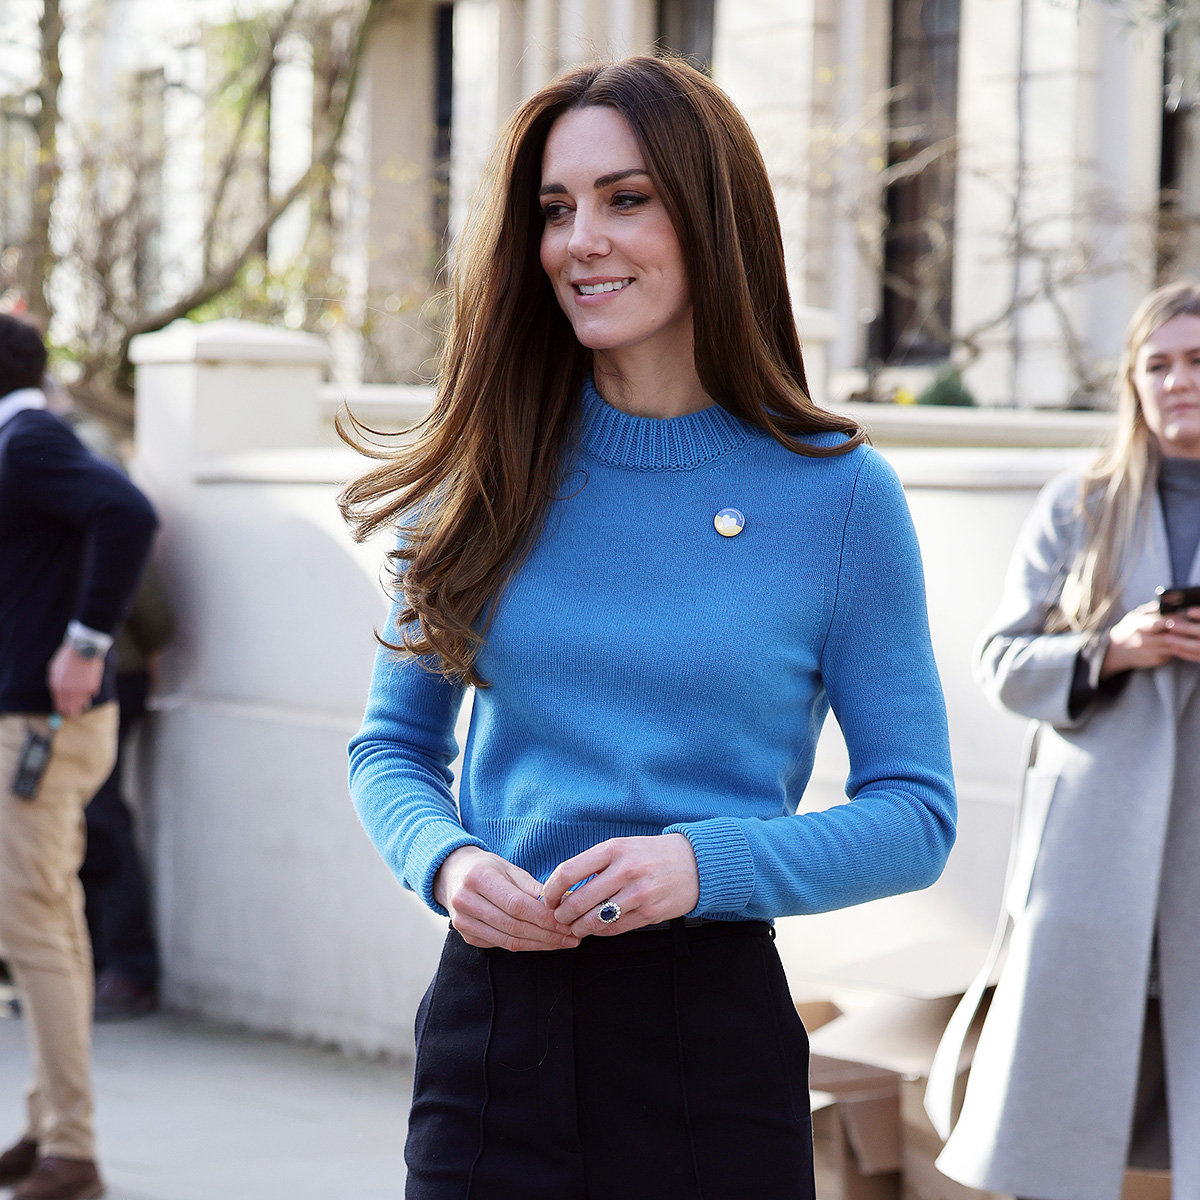 Jigsaw High Waisted Sport Luxe Trousers - Kate Middleton Pants